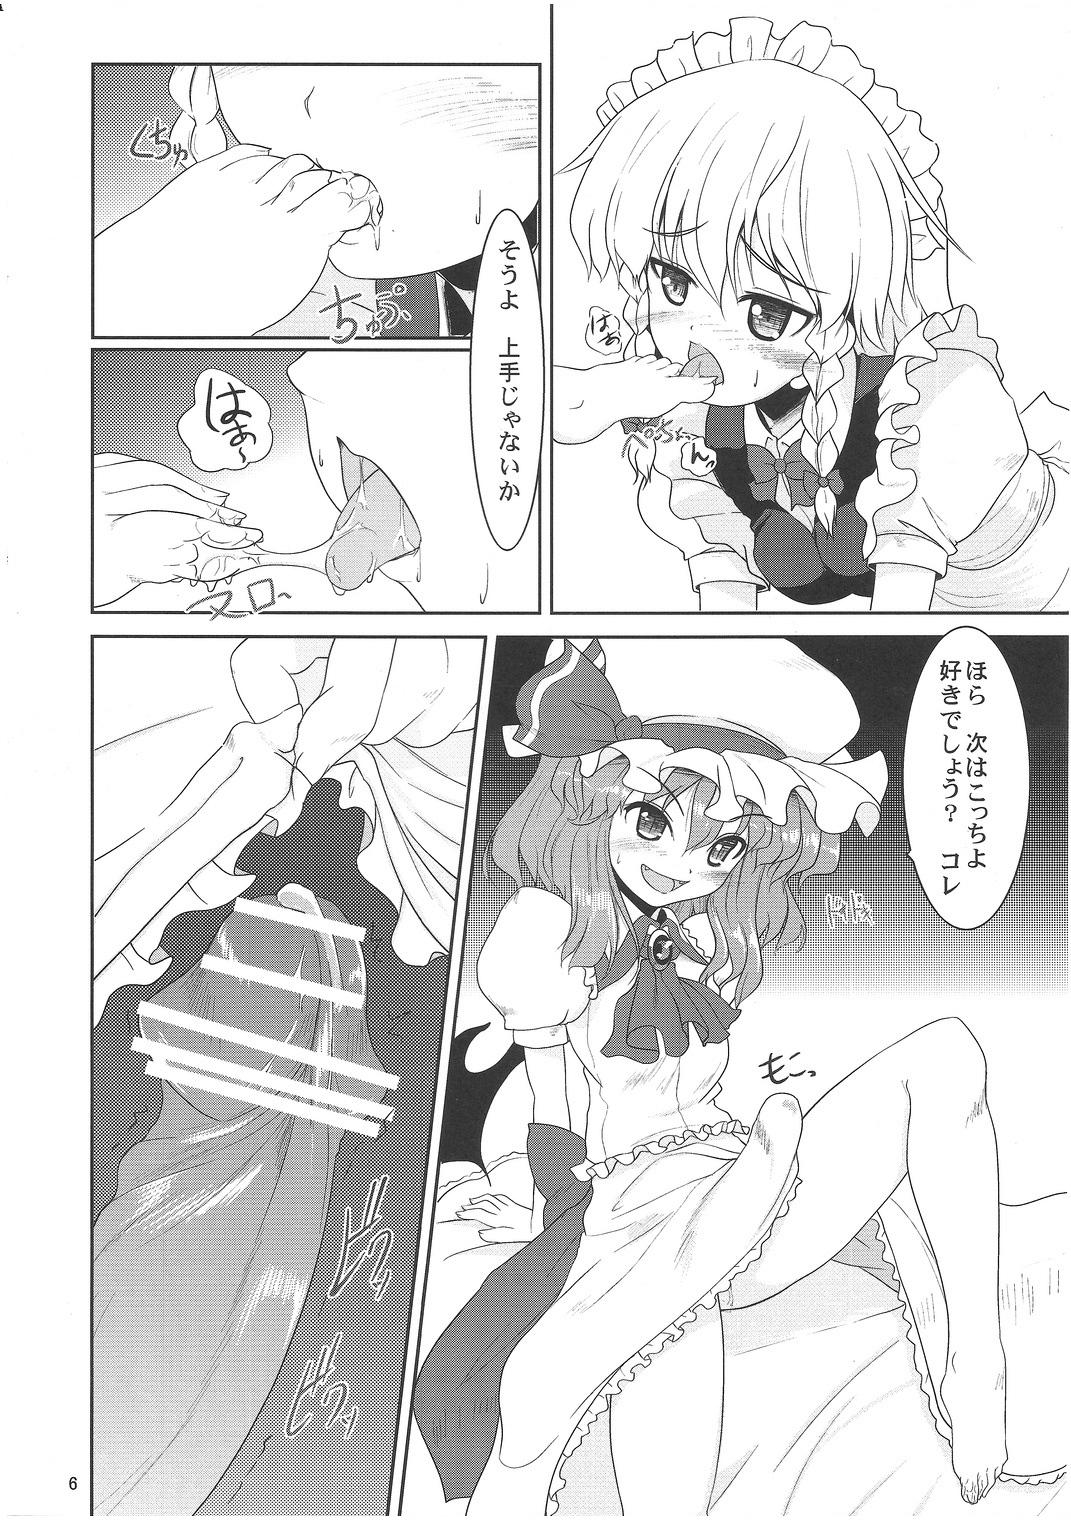 Hardcore Free Porn Maid or Dog - Touhou project Audition - Page 5